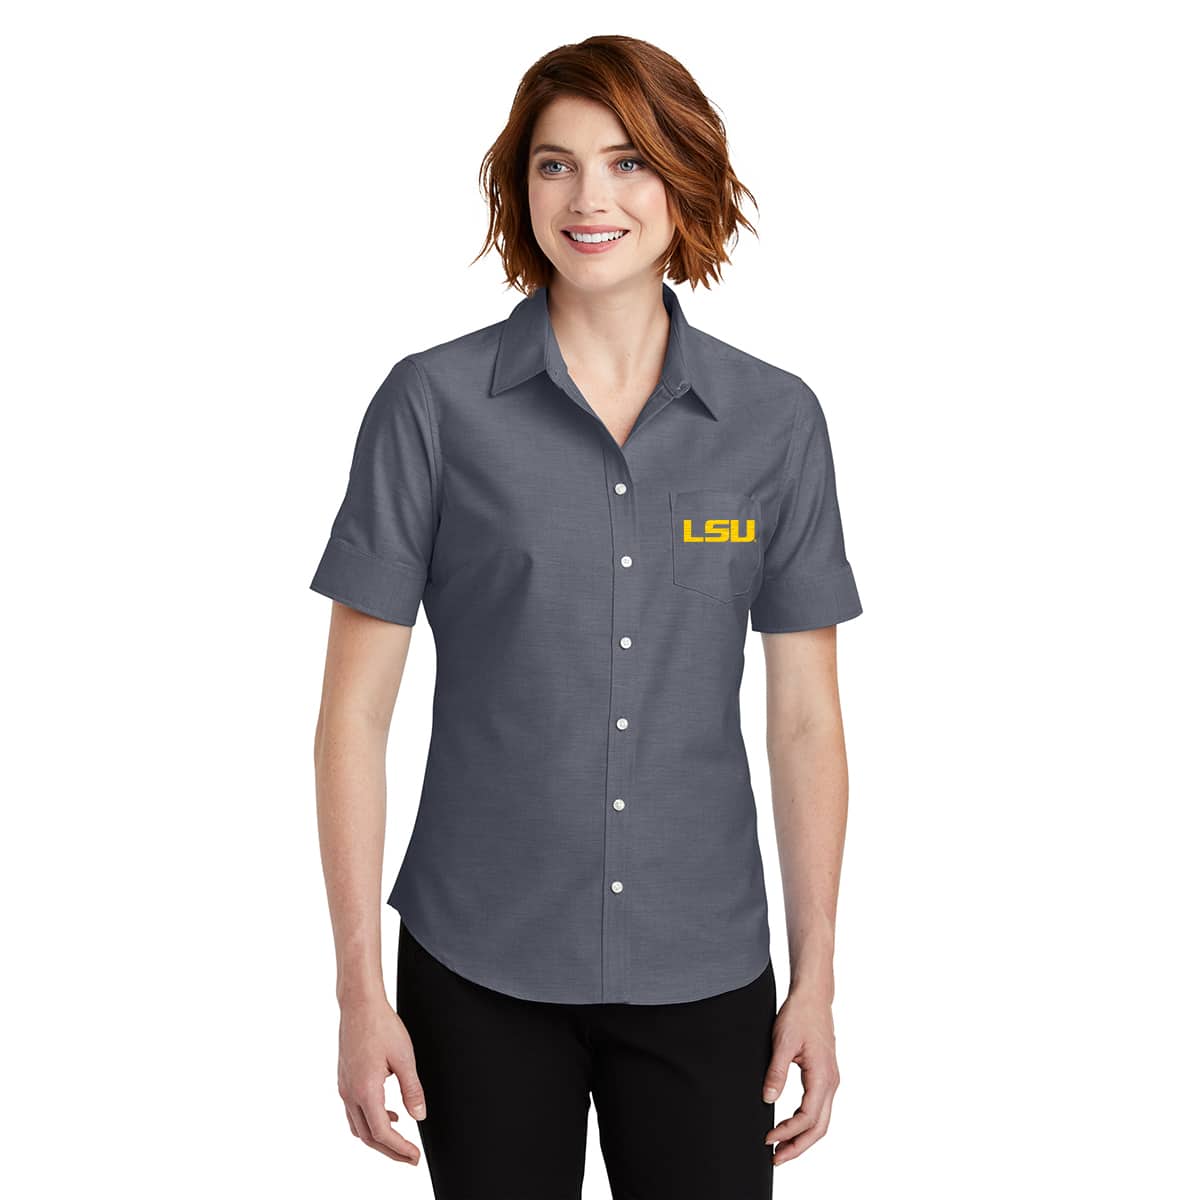 Embroidery Store in New Orleans | Custom Uniforms Store in New Orleans